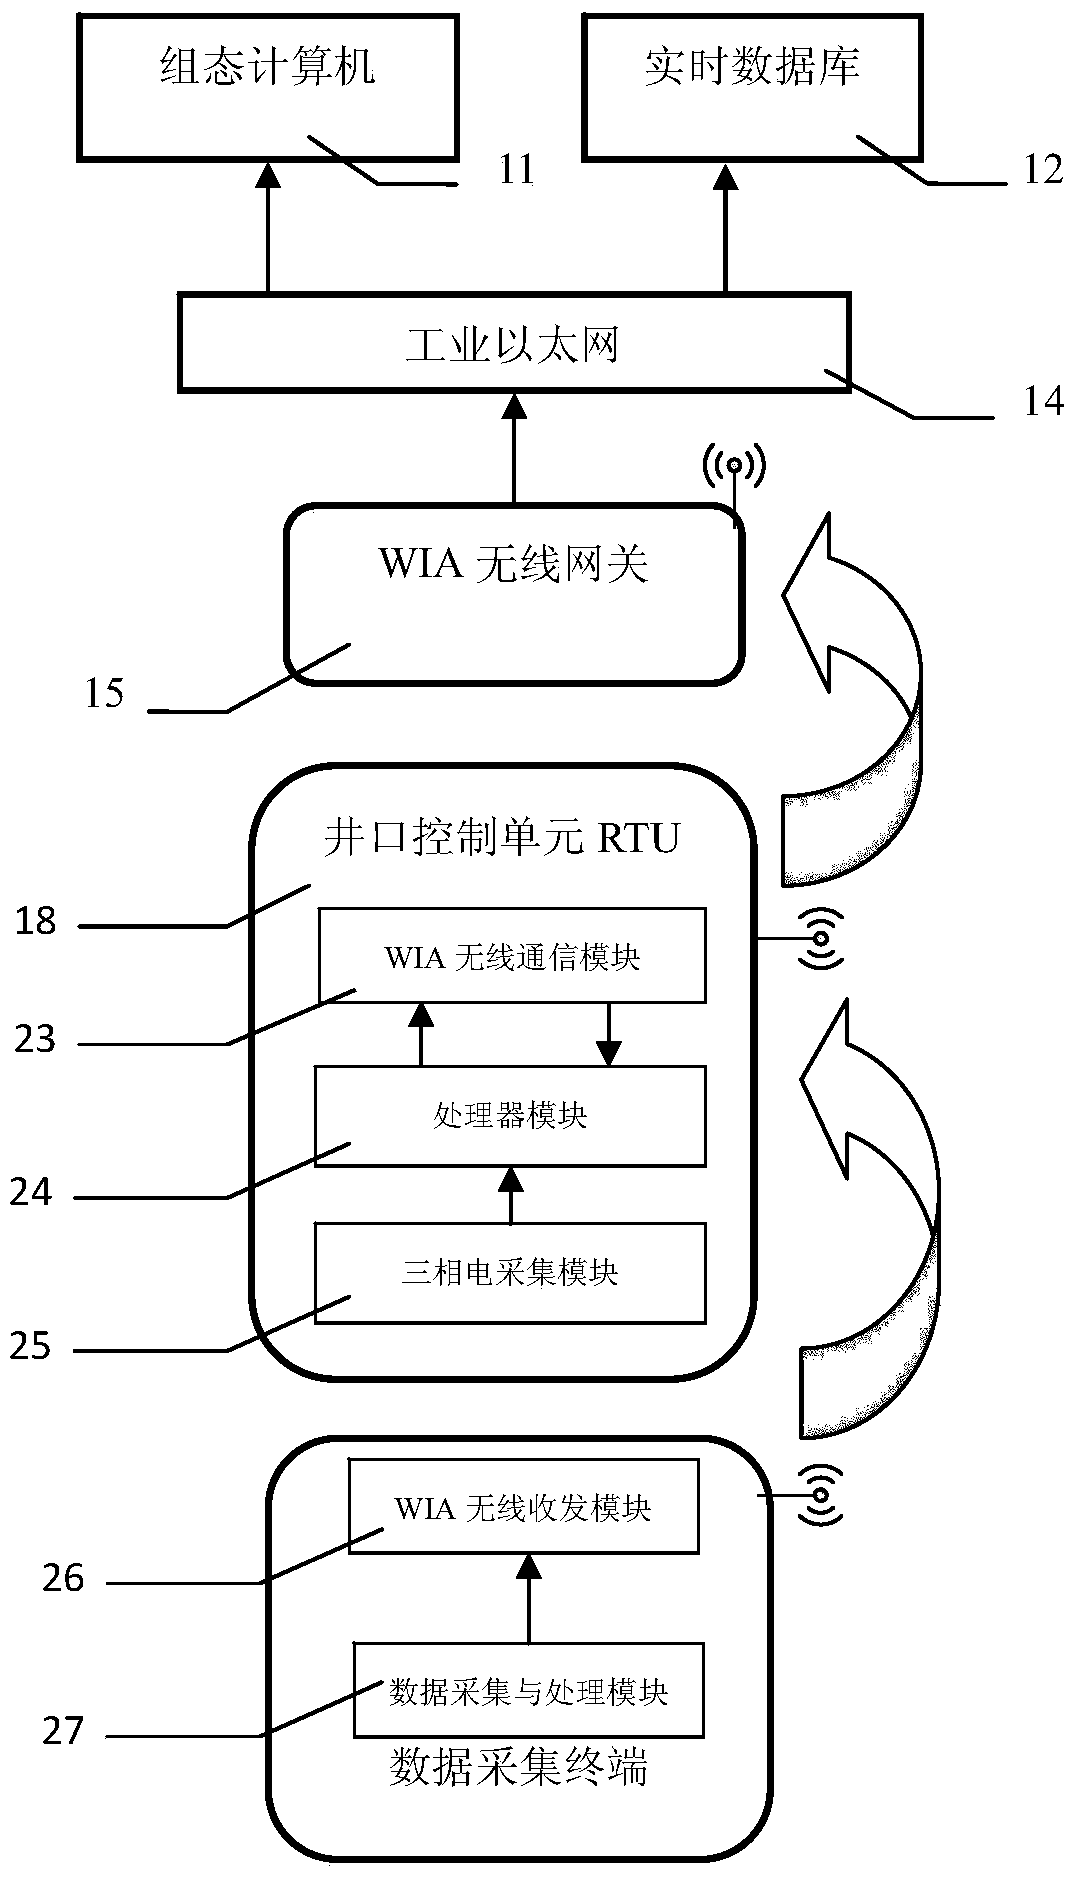 Pumping Well Data Acquisition Control System and Its Method Based on Wireless Network